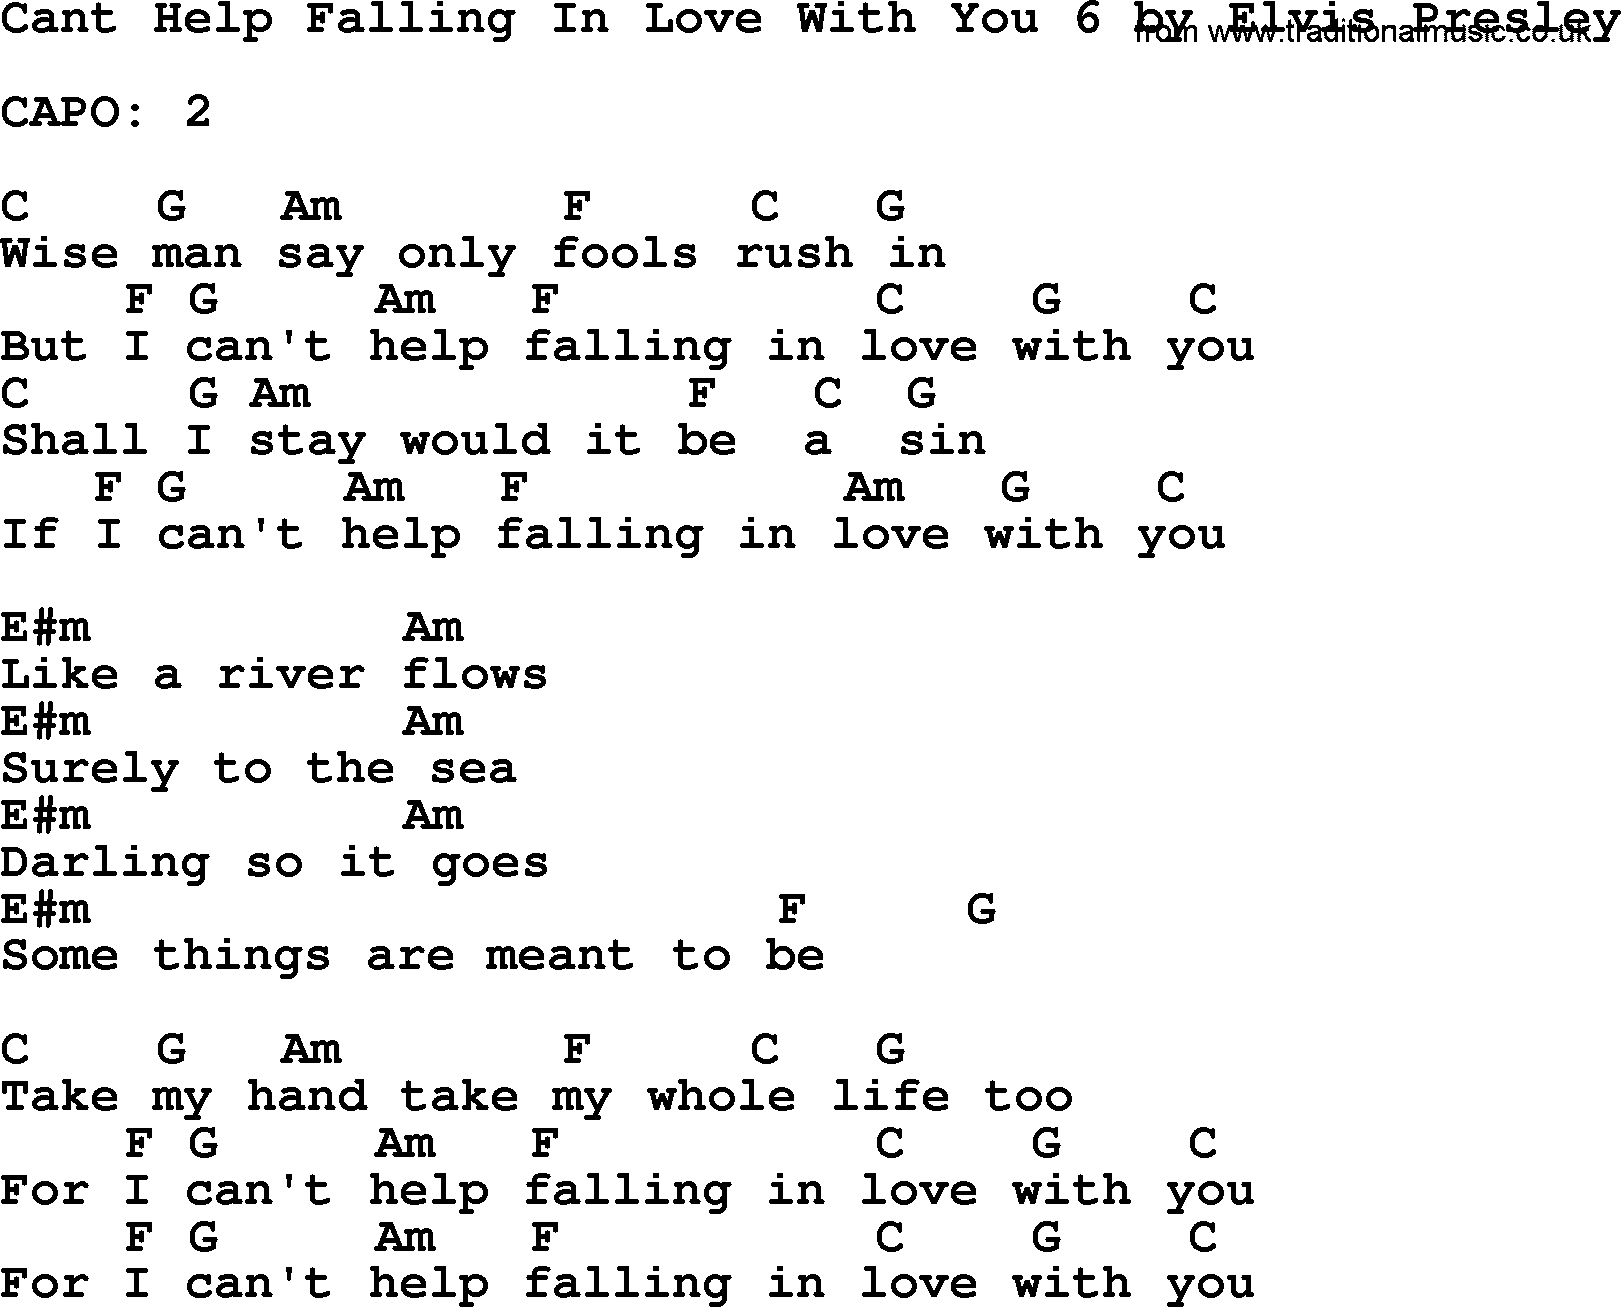 Elvis Presley song: Cant Help Falling In Love With You 6, lyrics and chords